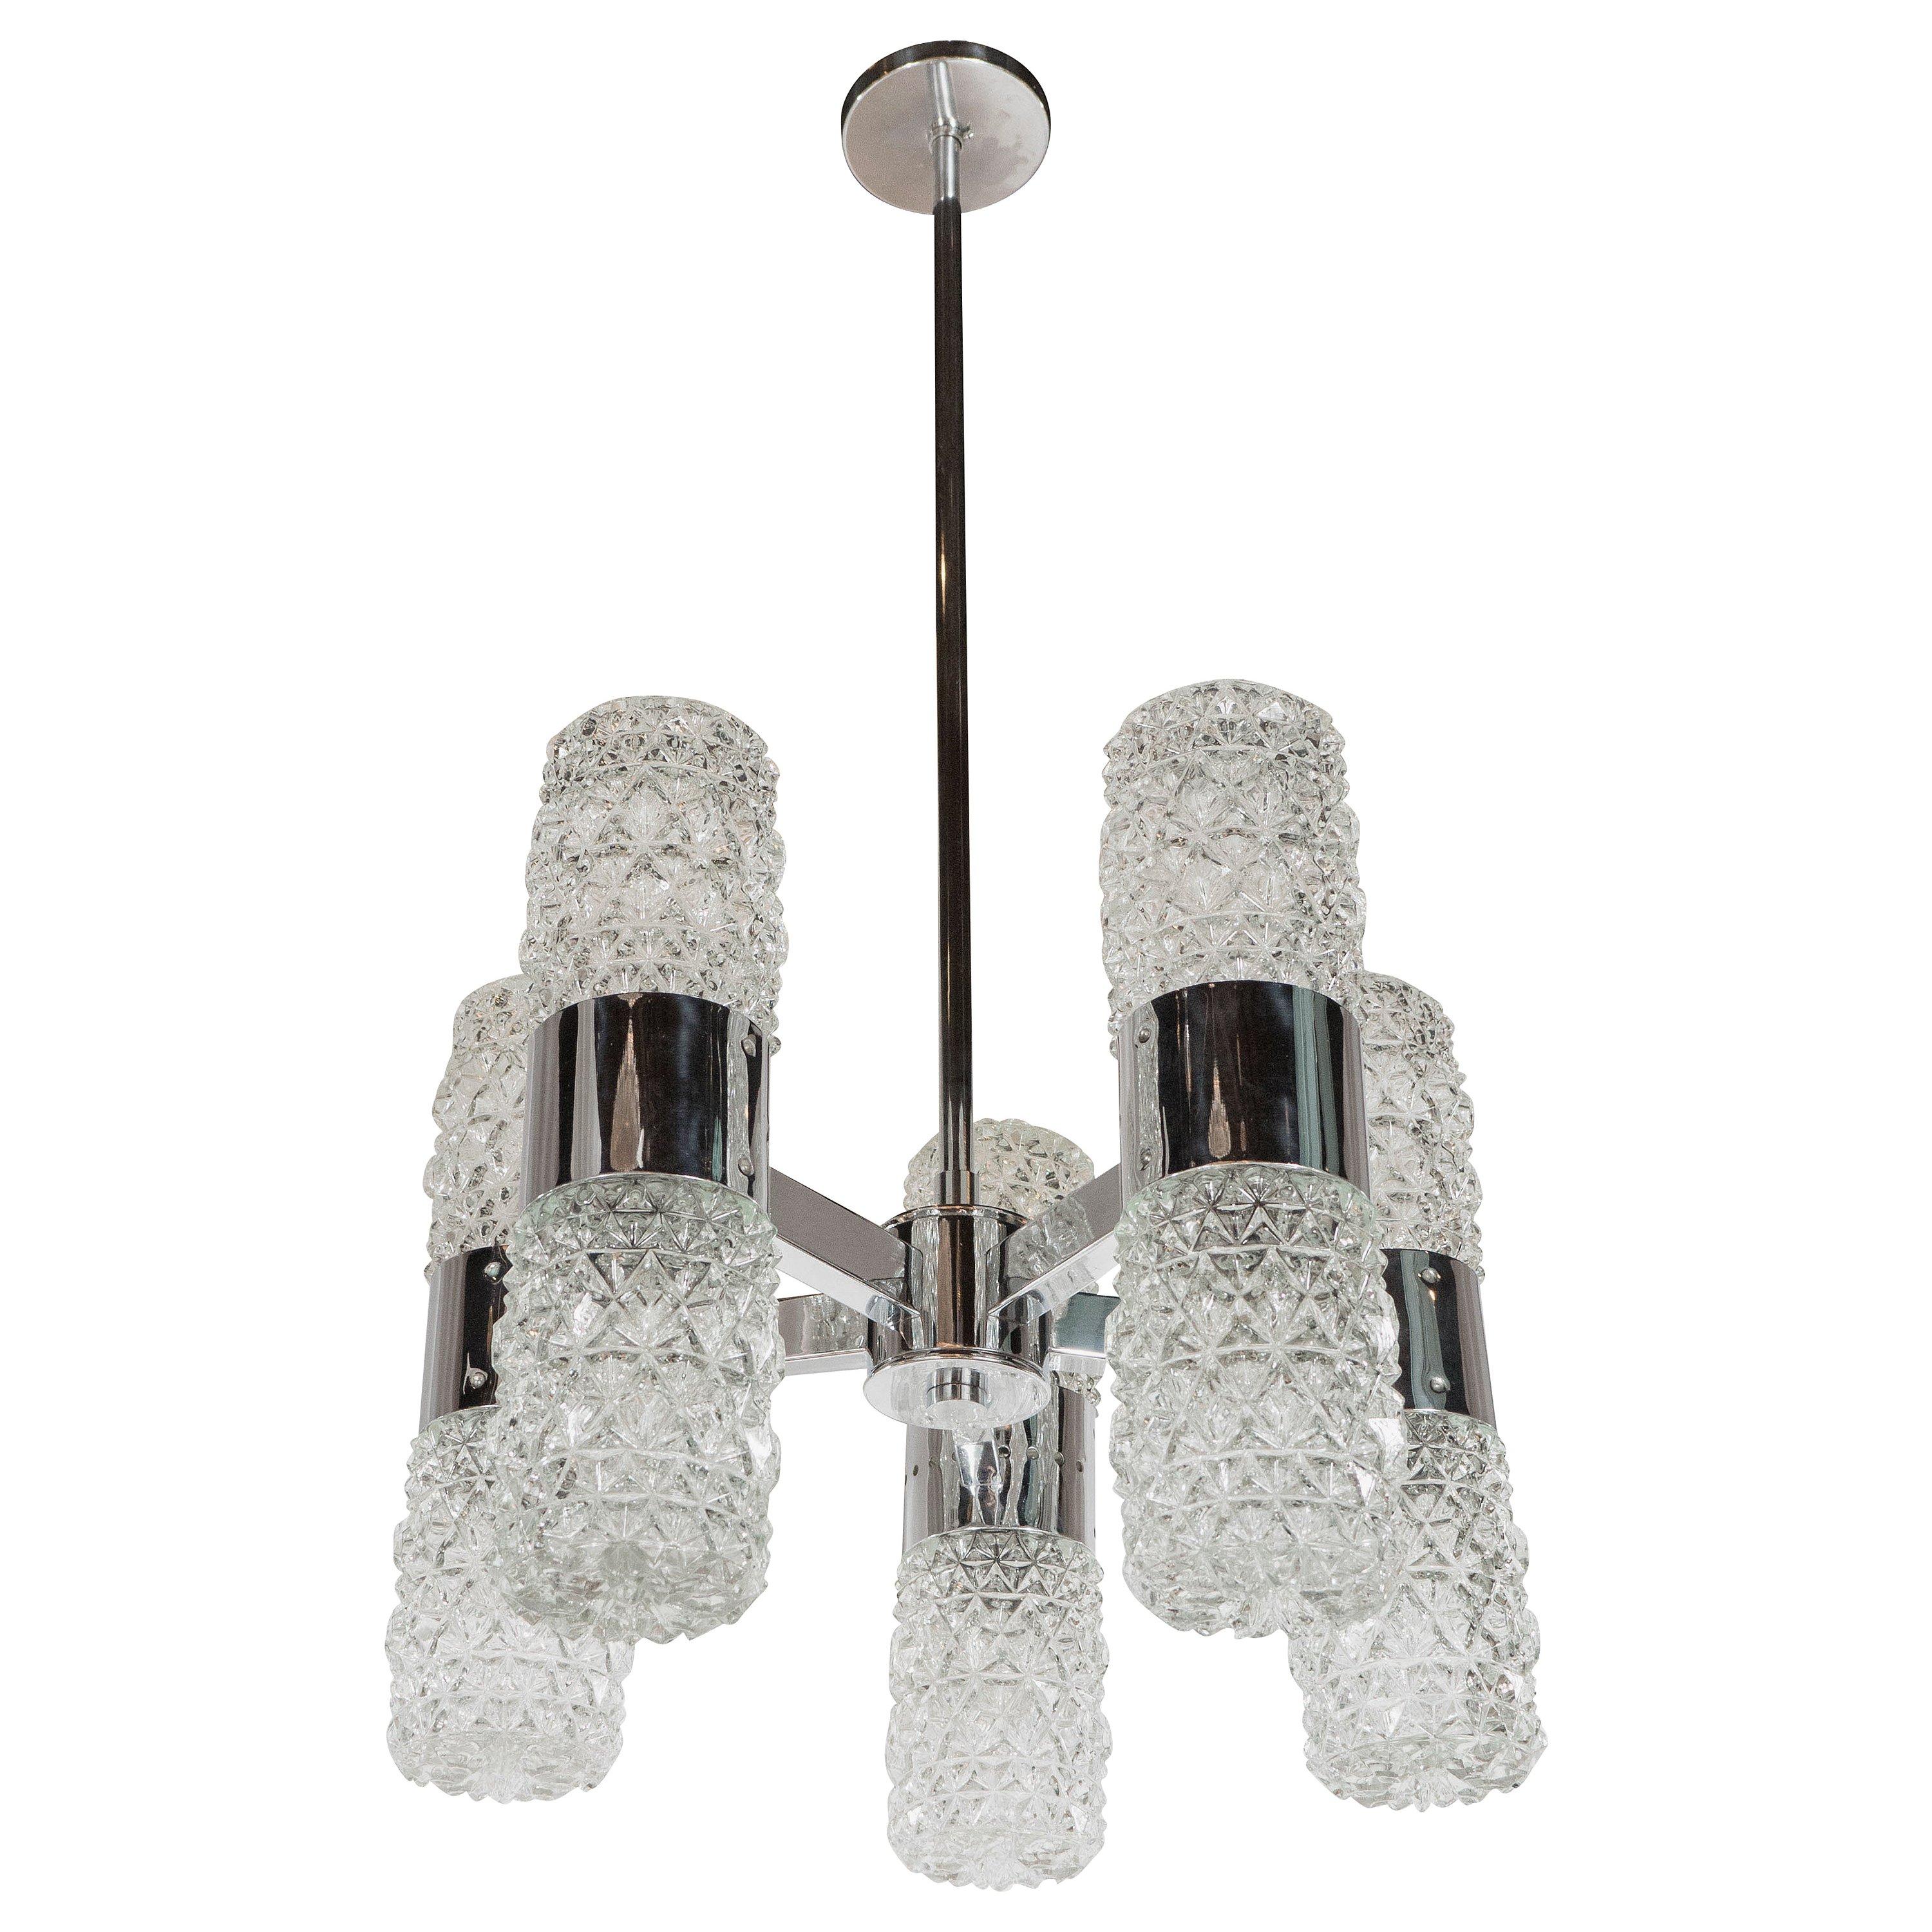 Mid-Century Modernist Chandelier by Kinkeldey in Chrome and Textured Glass